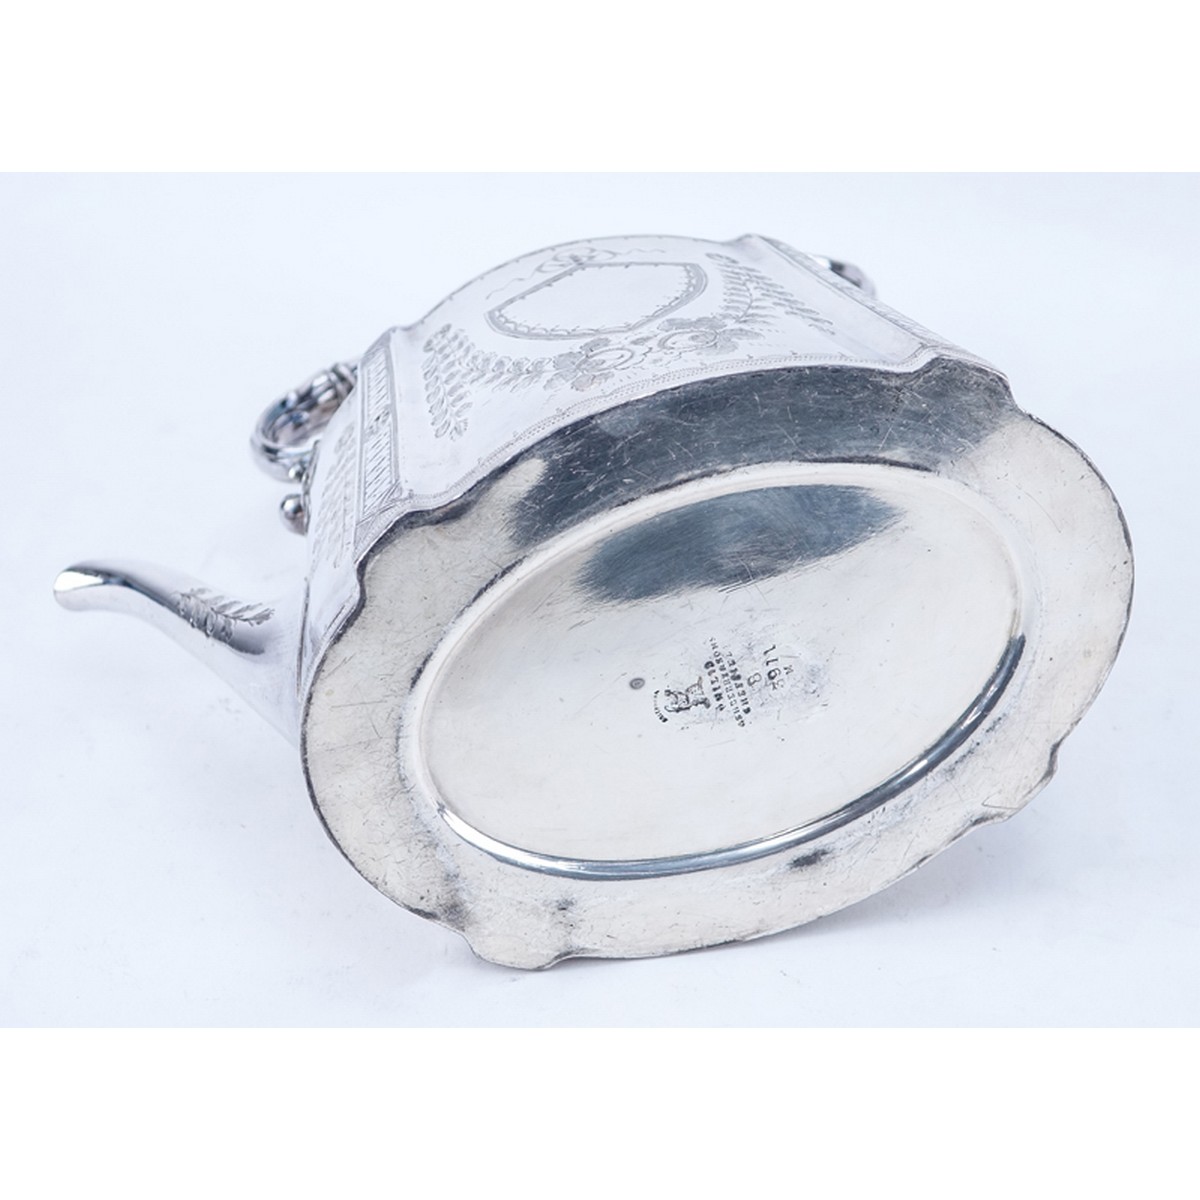 Grouping of Two (2): Philip Ashbury & Sons Sheffield Silver Plate Tea Pot, English Silver Plate Tea Pot with Warming Stand. Each marked on base, English tea pot has hallmarks to base.